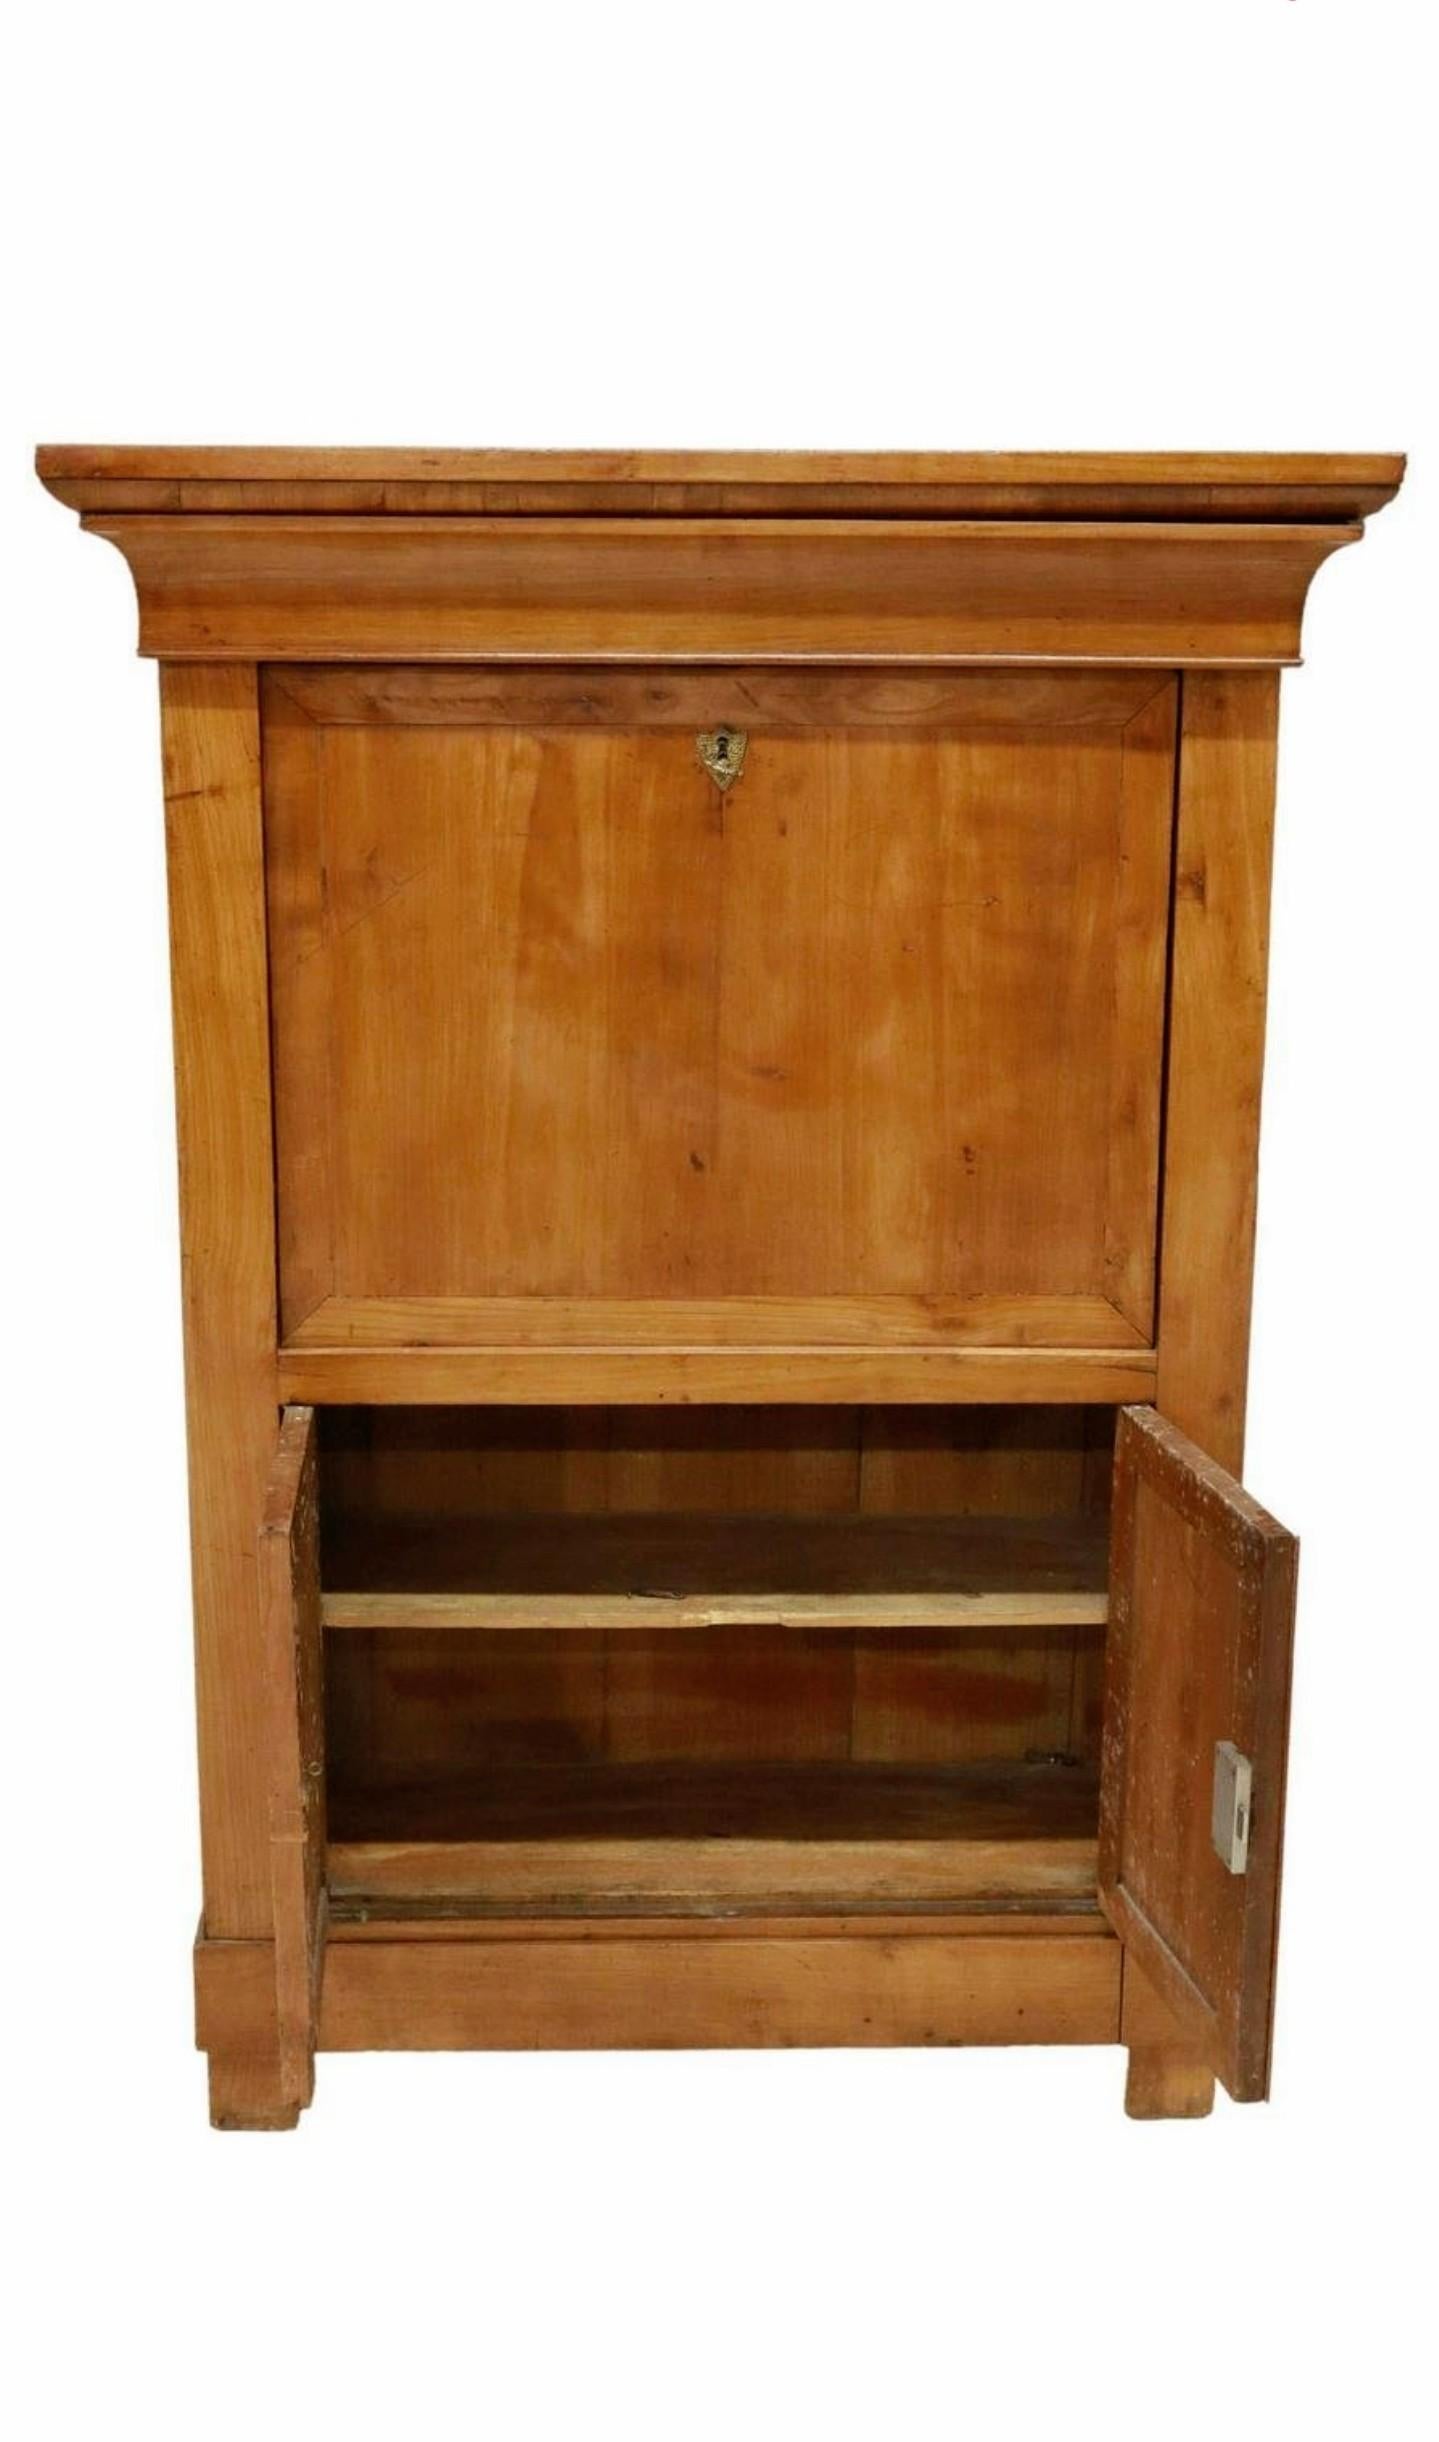 19th C. French Empire Style Louis Philippe Period Secretaire Abattant In Good Condition For Sale In Forney, TX